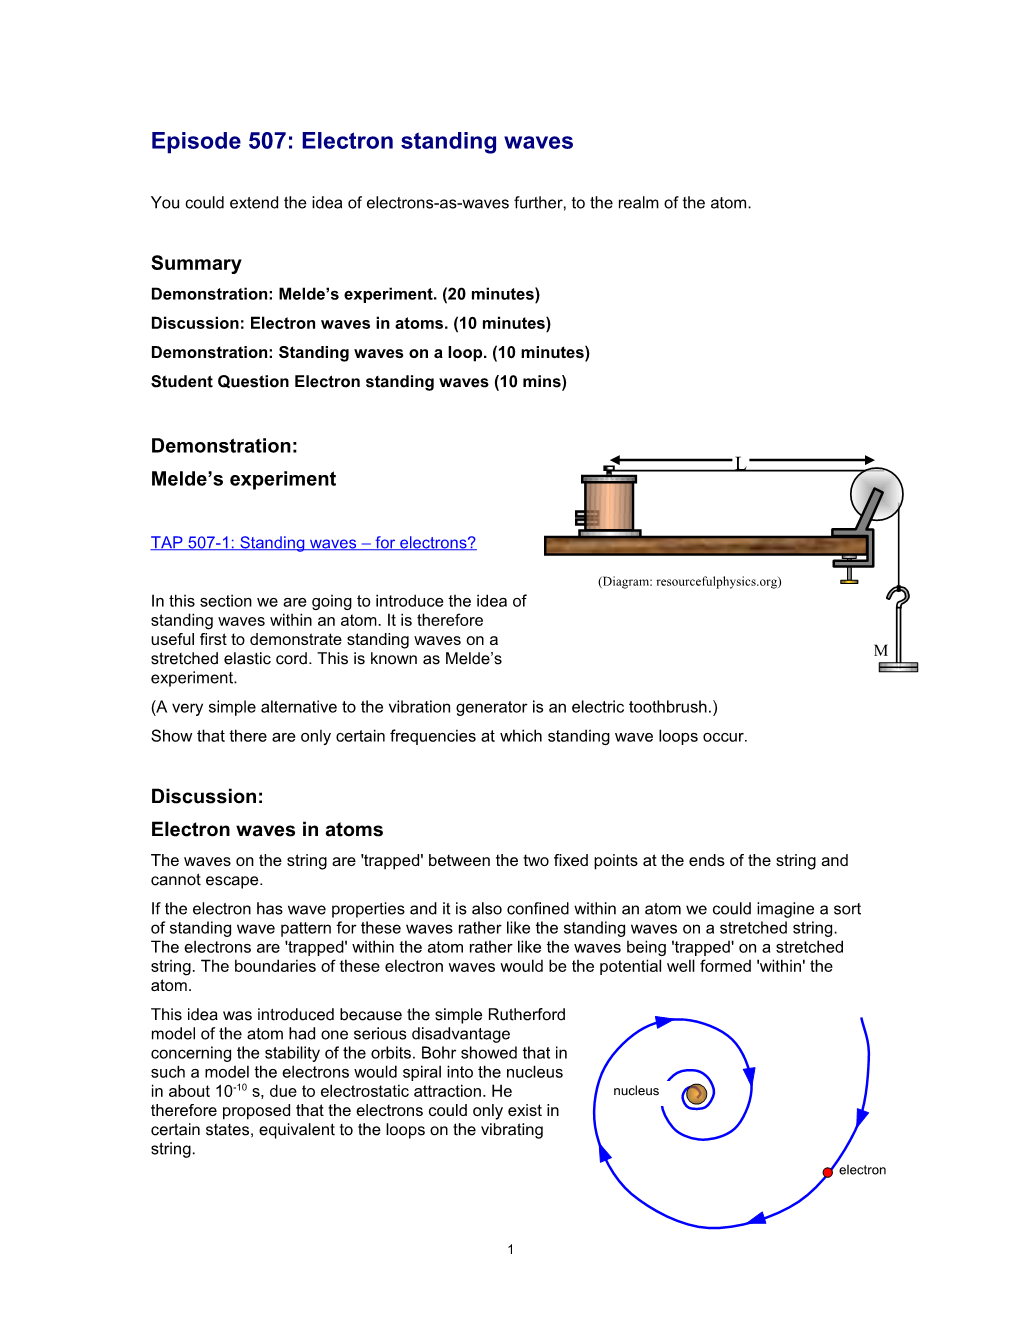 TAP507-0: Electron Standing Waves